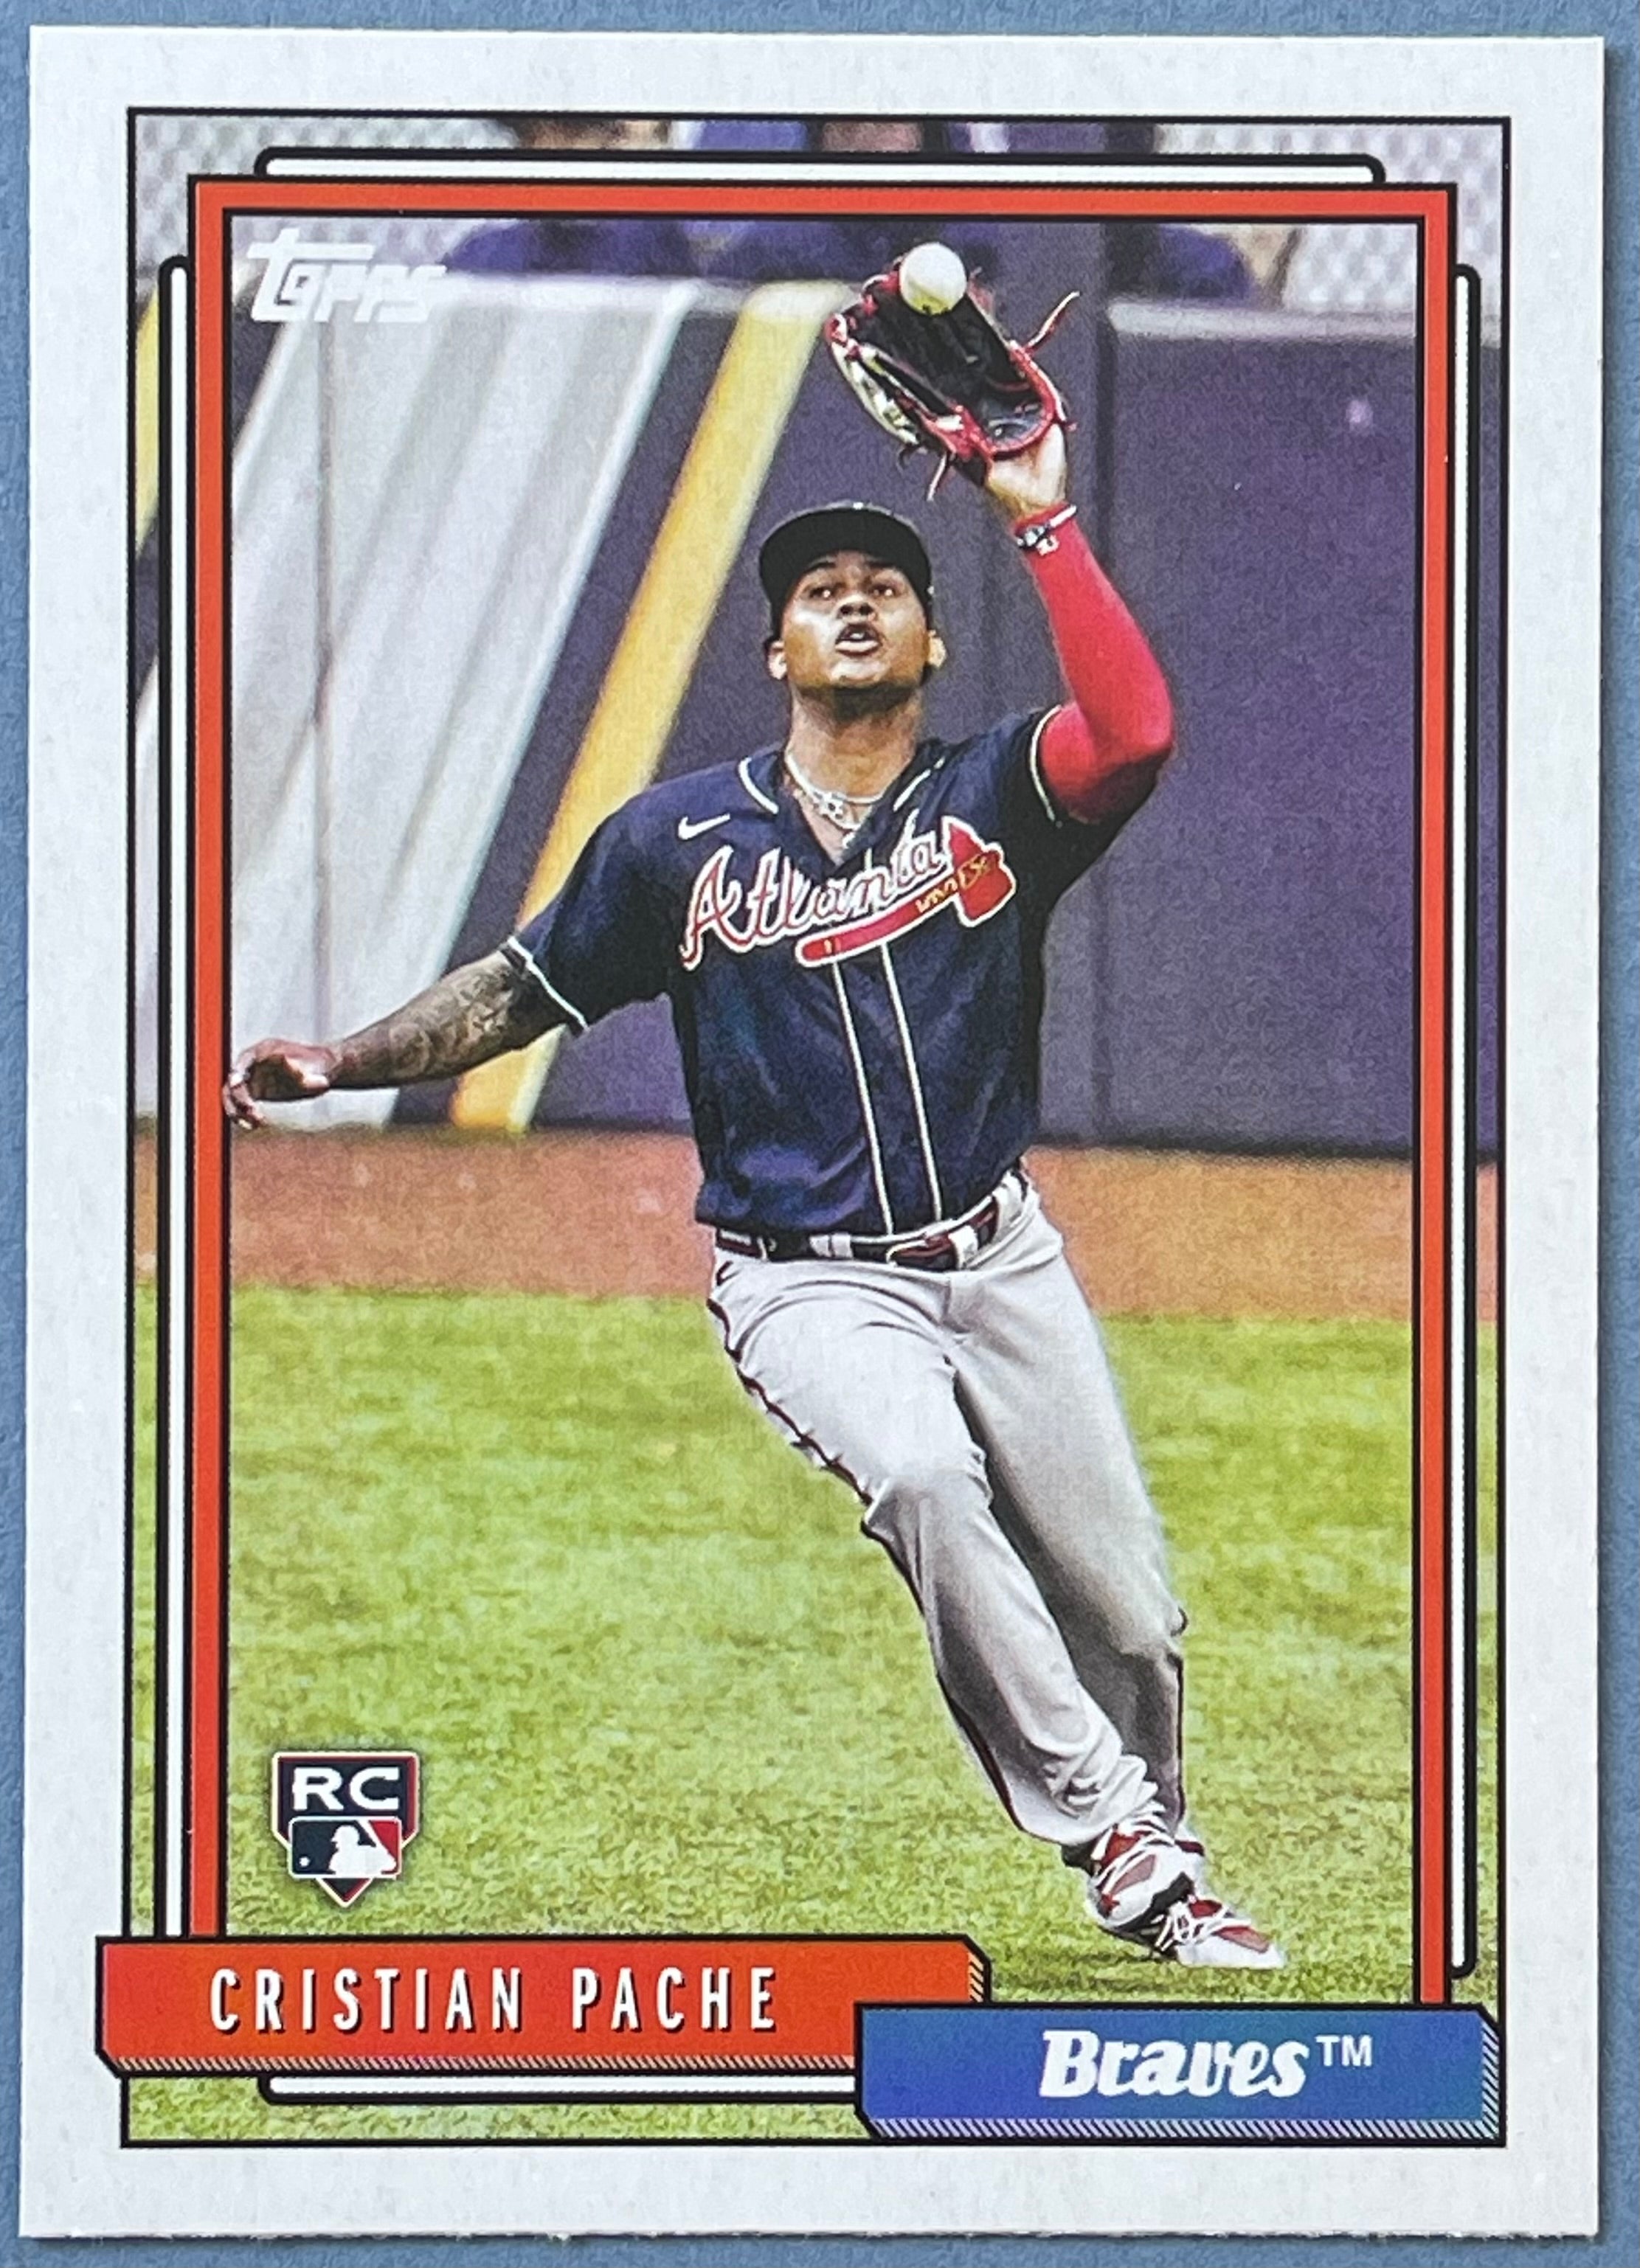  2021 Topps Archives #287 Cristian Pache RC Rookie